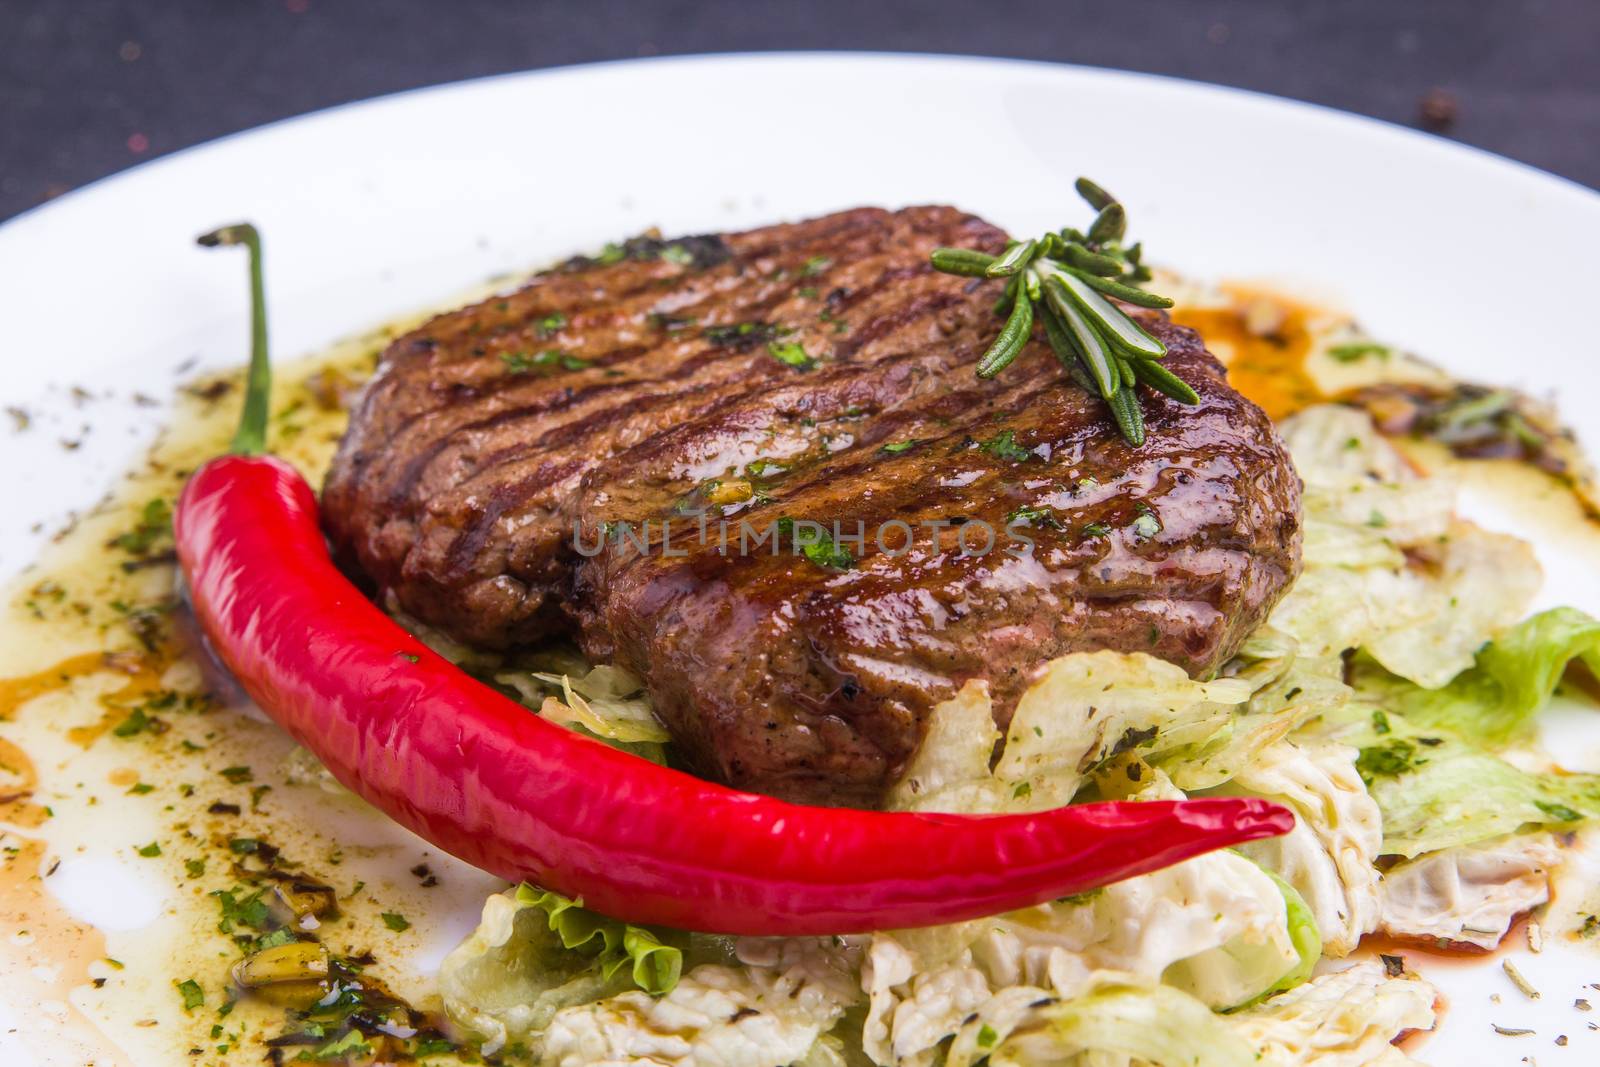 Grilled veal steak with vegetables on a plate by mrakor